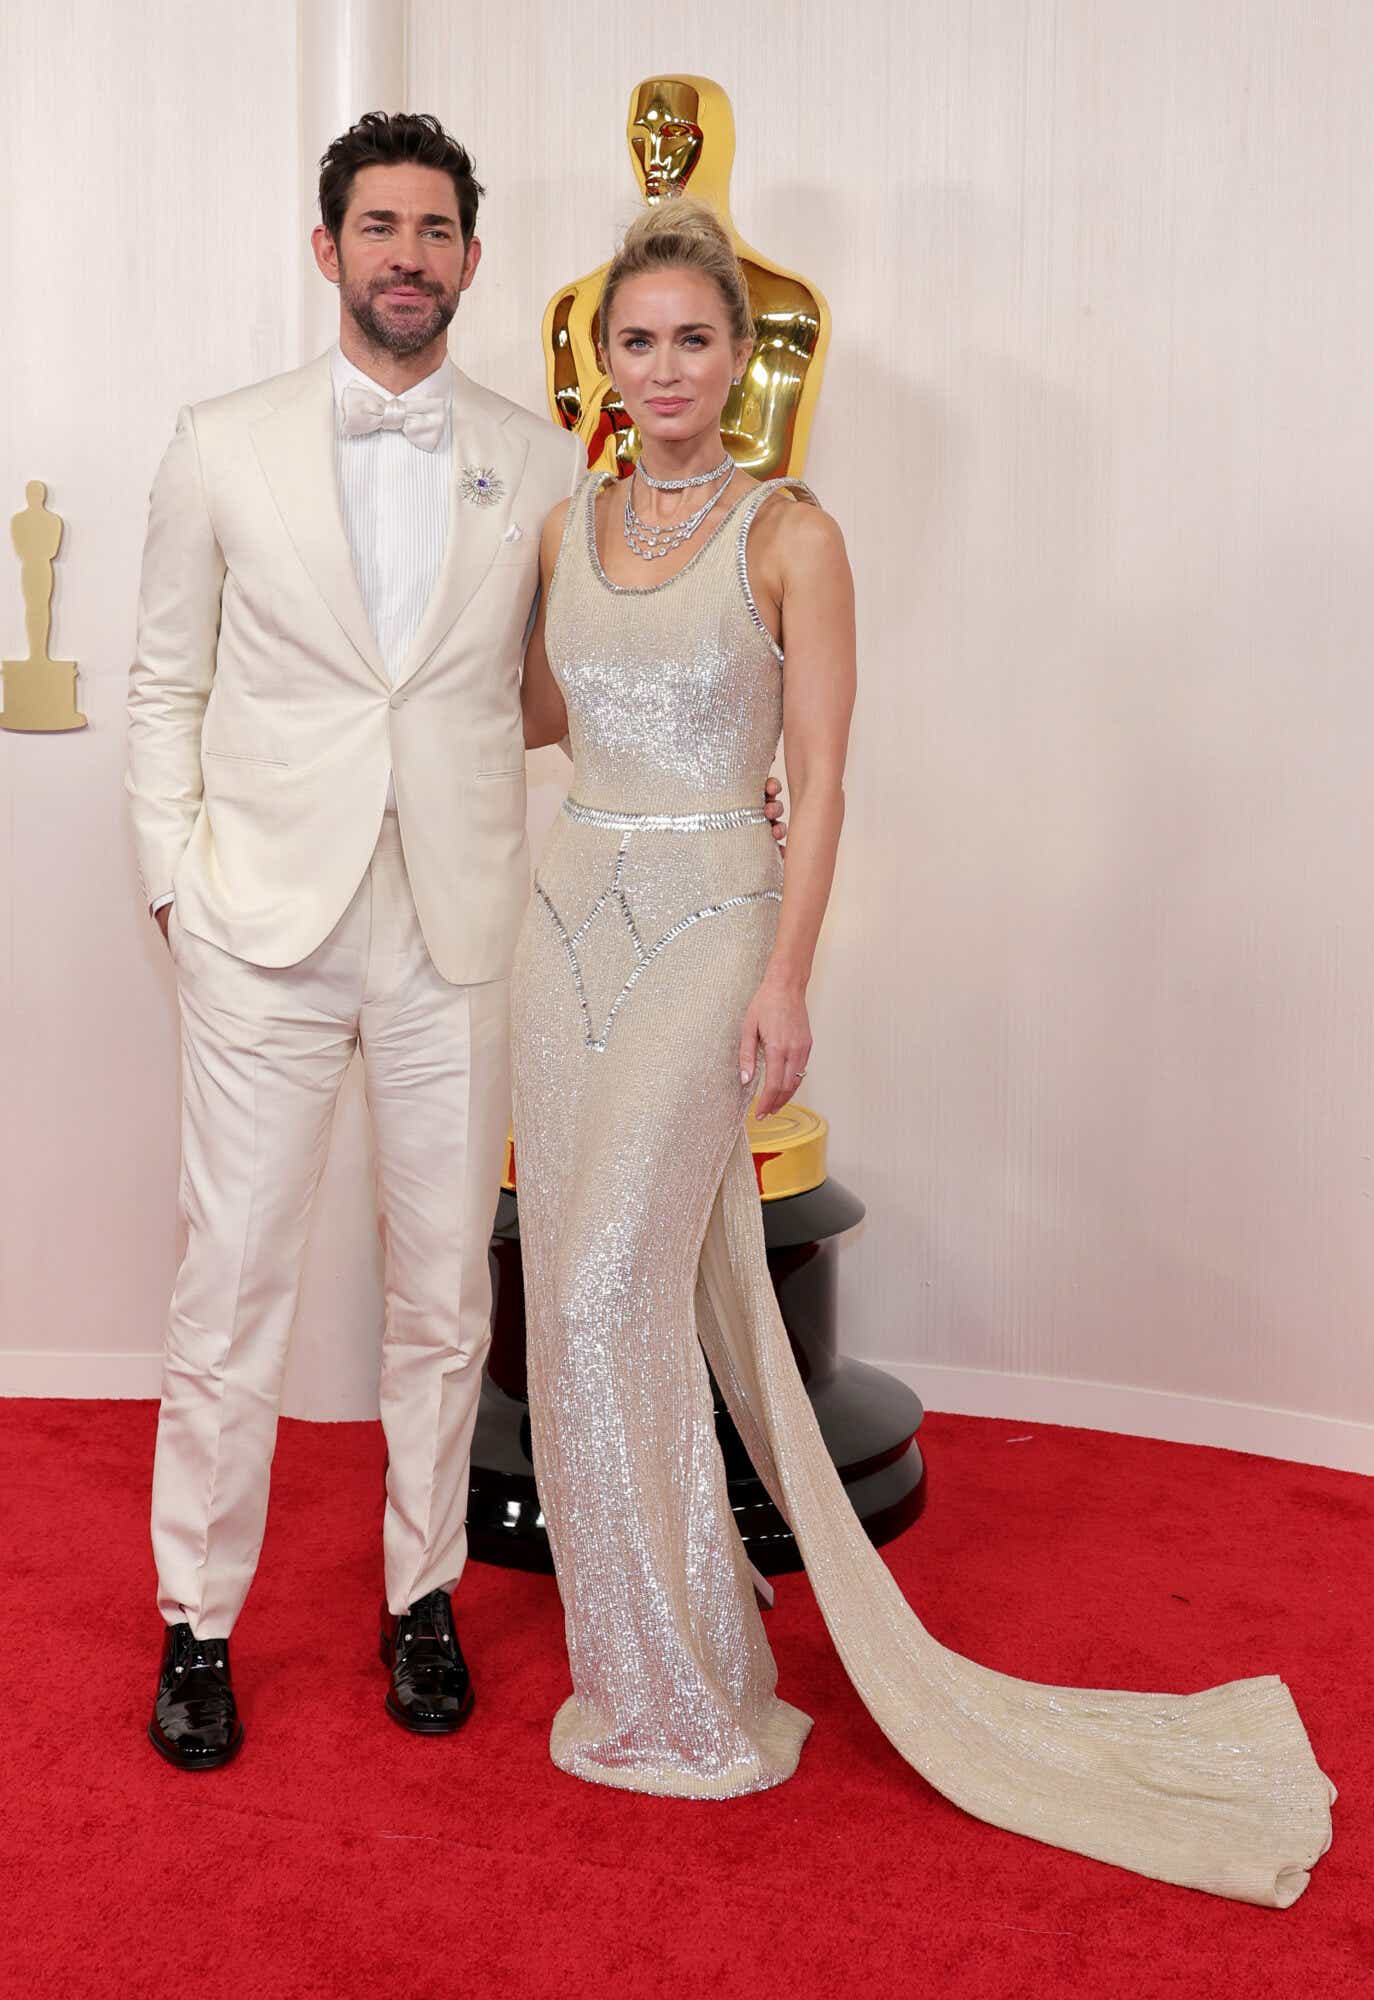 John Krasinski (left) in a white tux and a bow tie. Emily Blunt (right) wears a white sequin gown with floating straps.